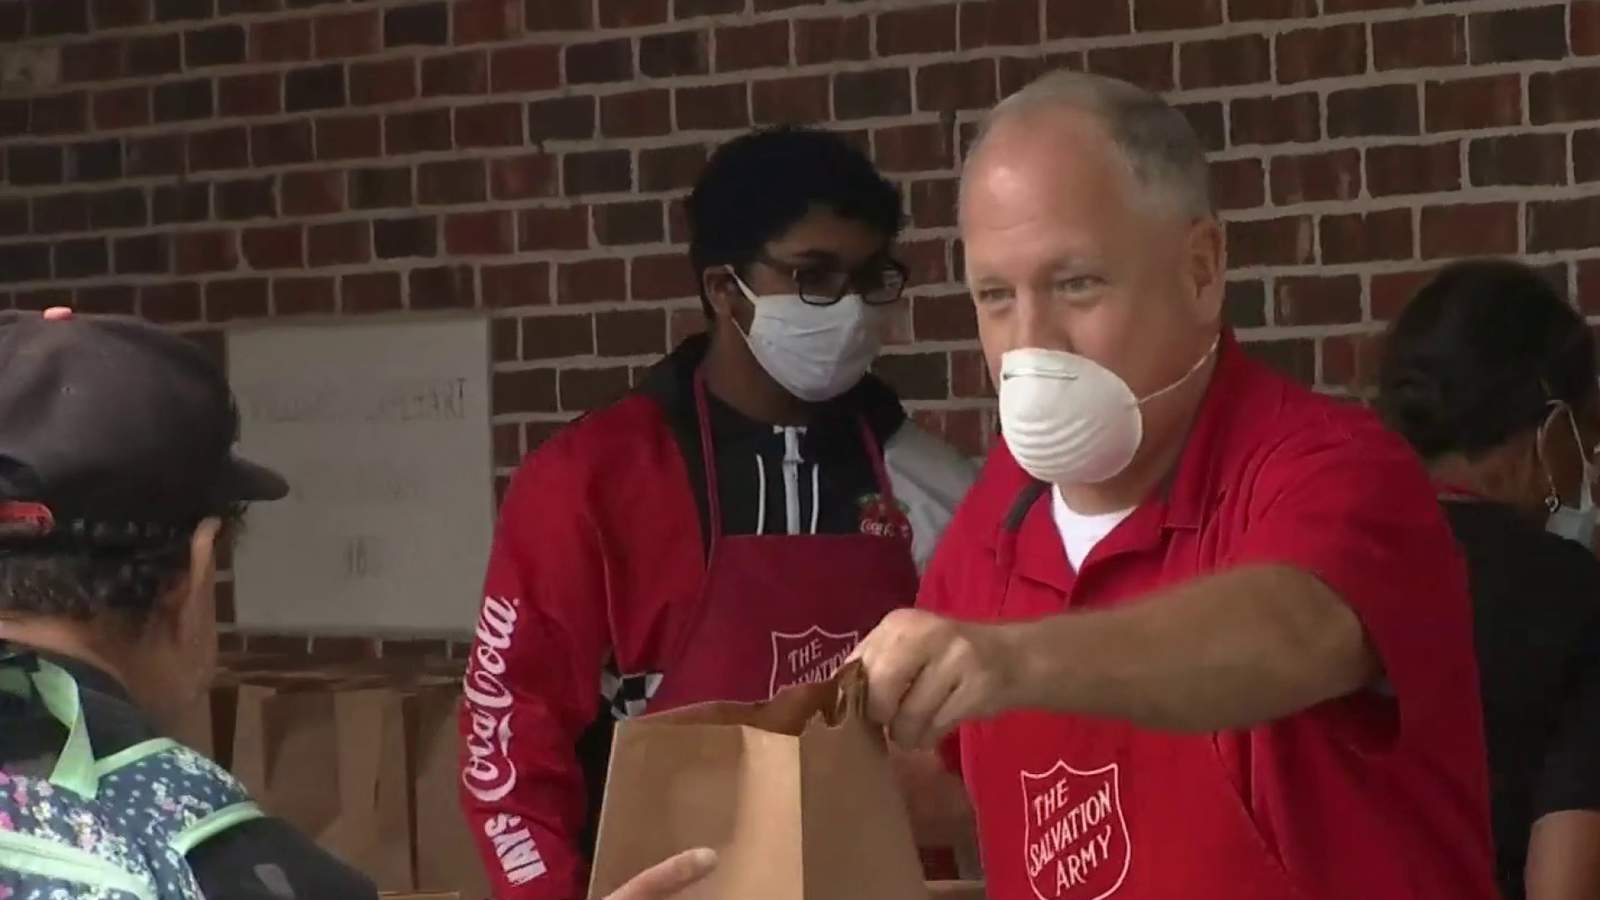 Salvation Army hands out 1,300 boxes of food for families affected by pandemic